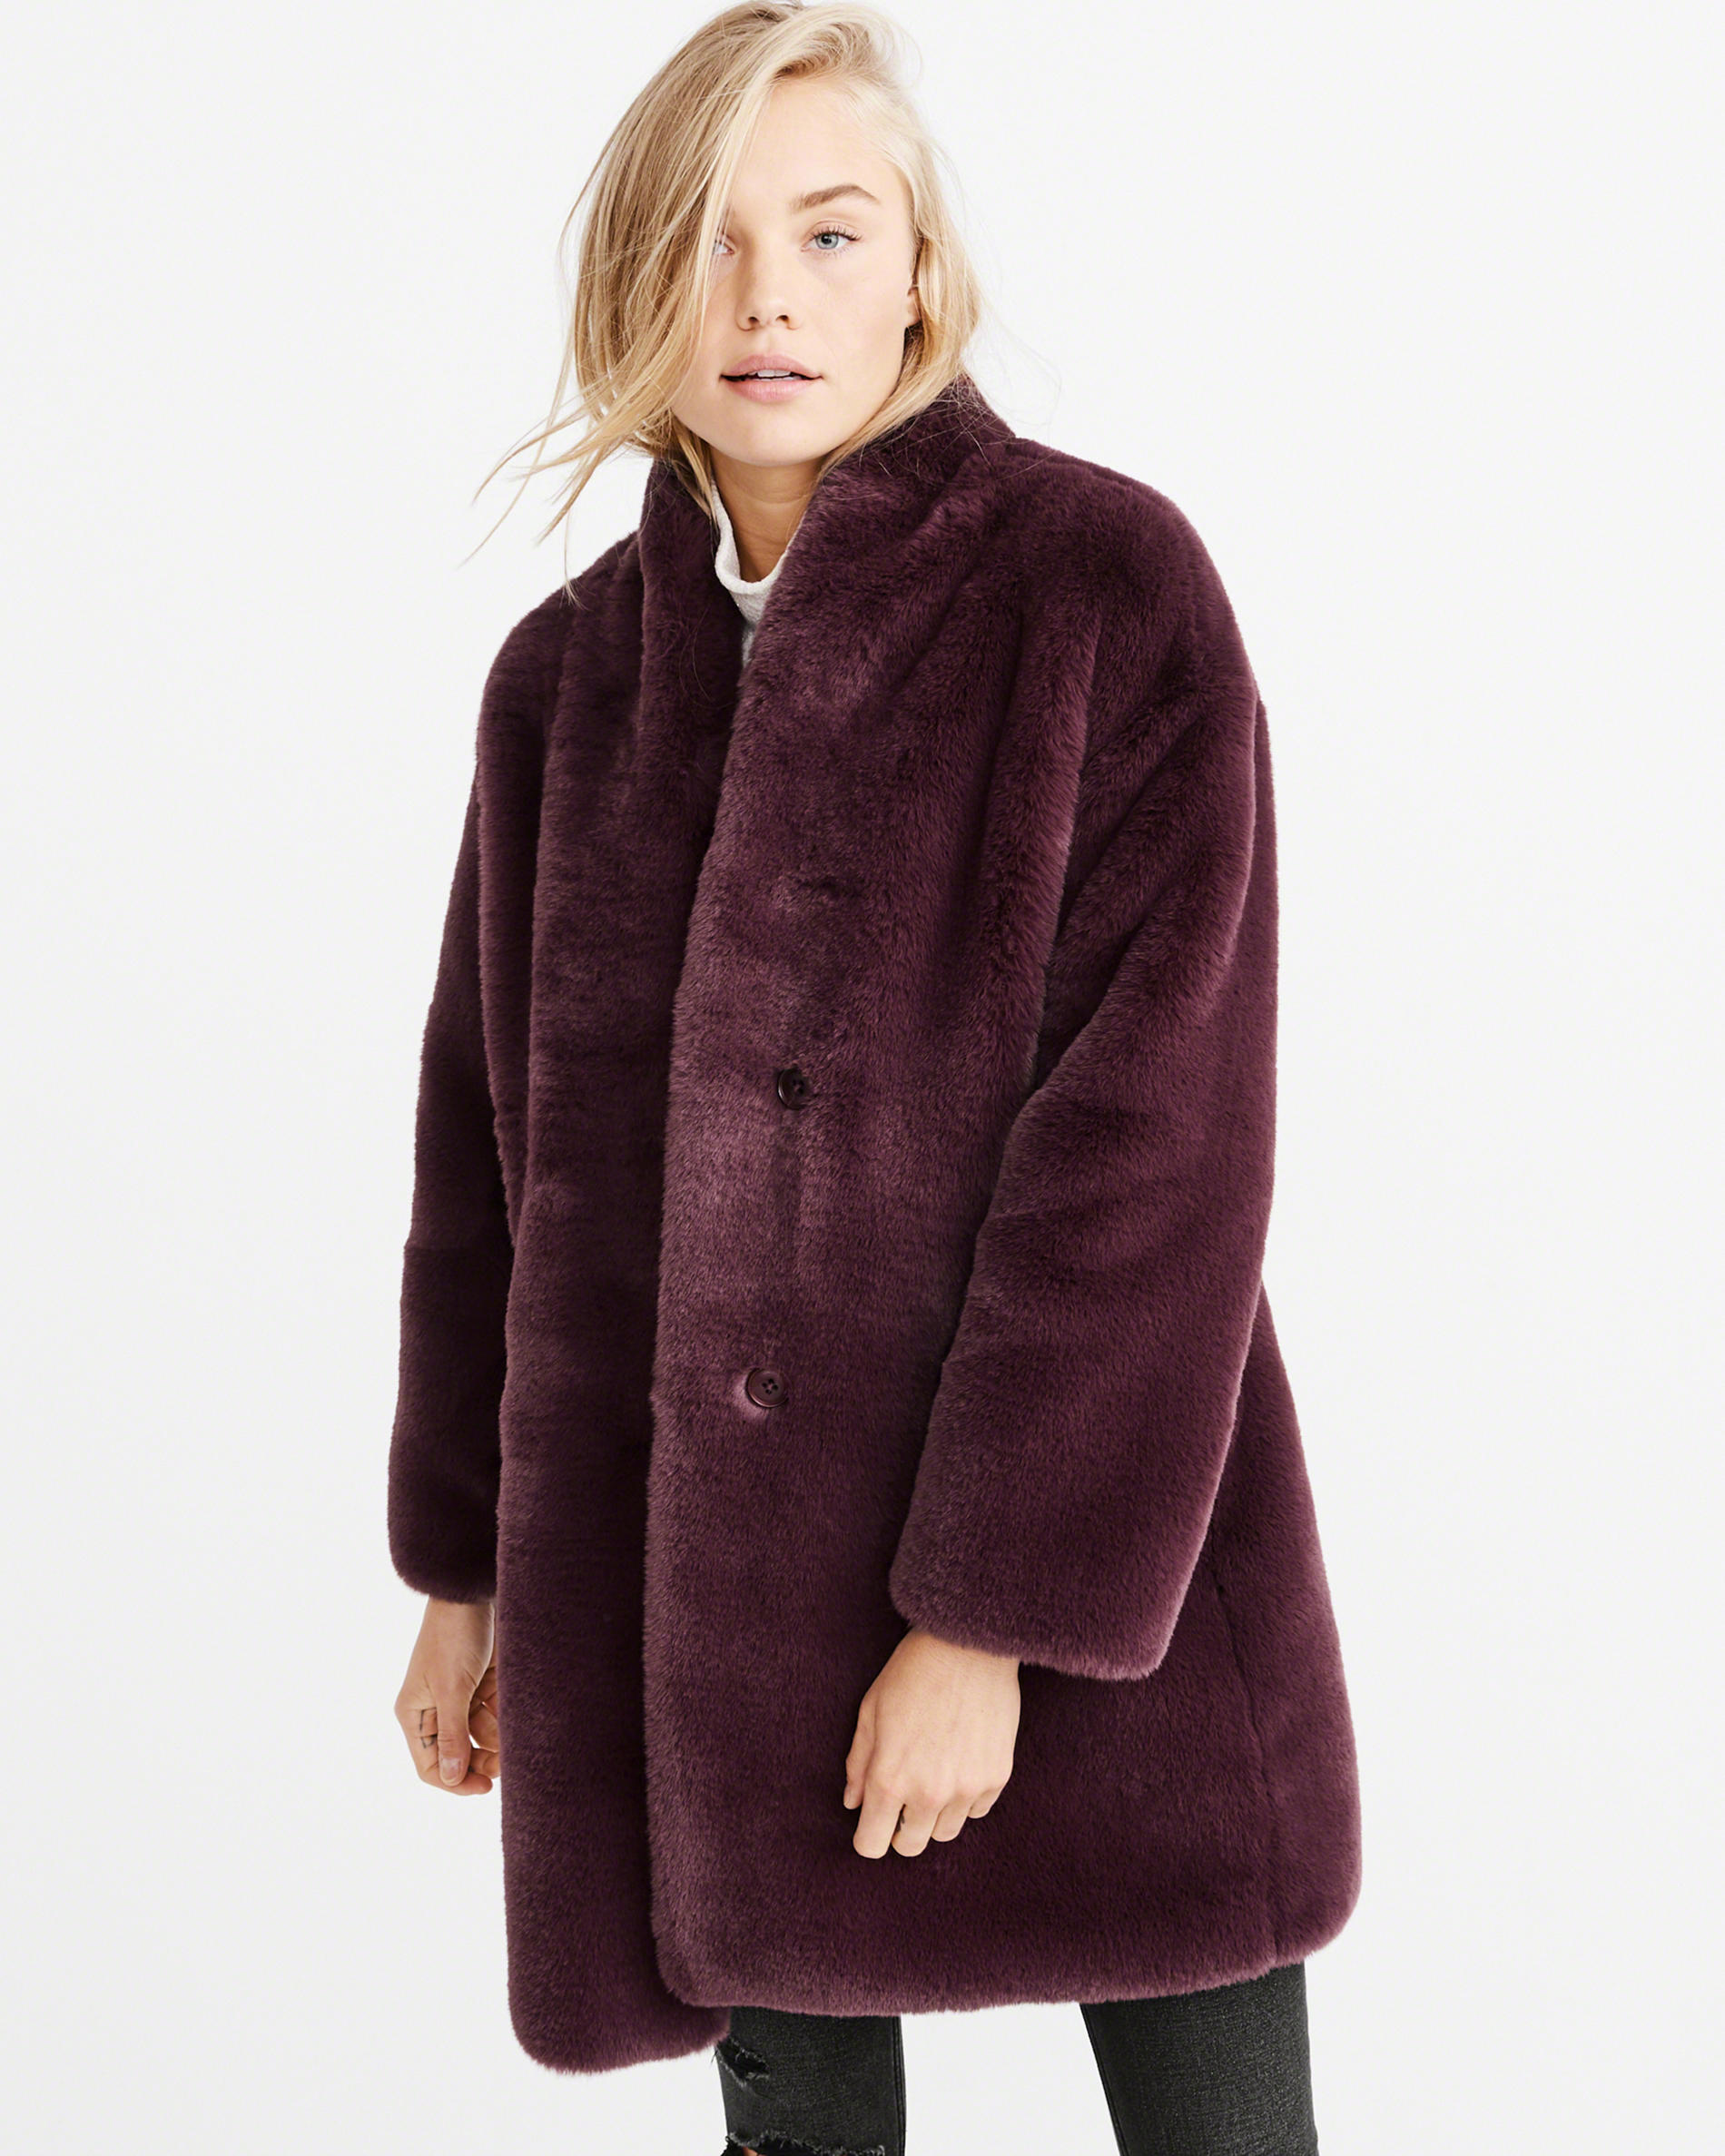 abercrombie and fitch fur coat